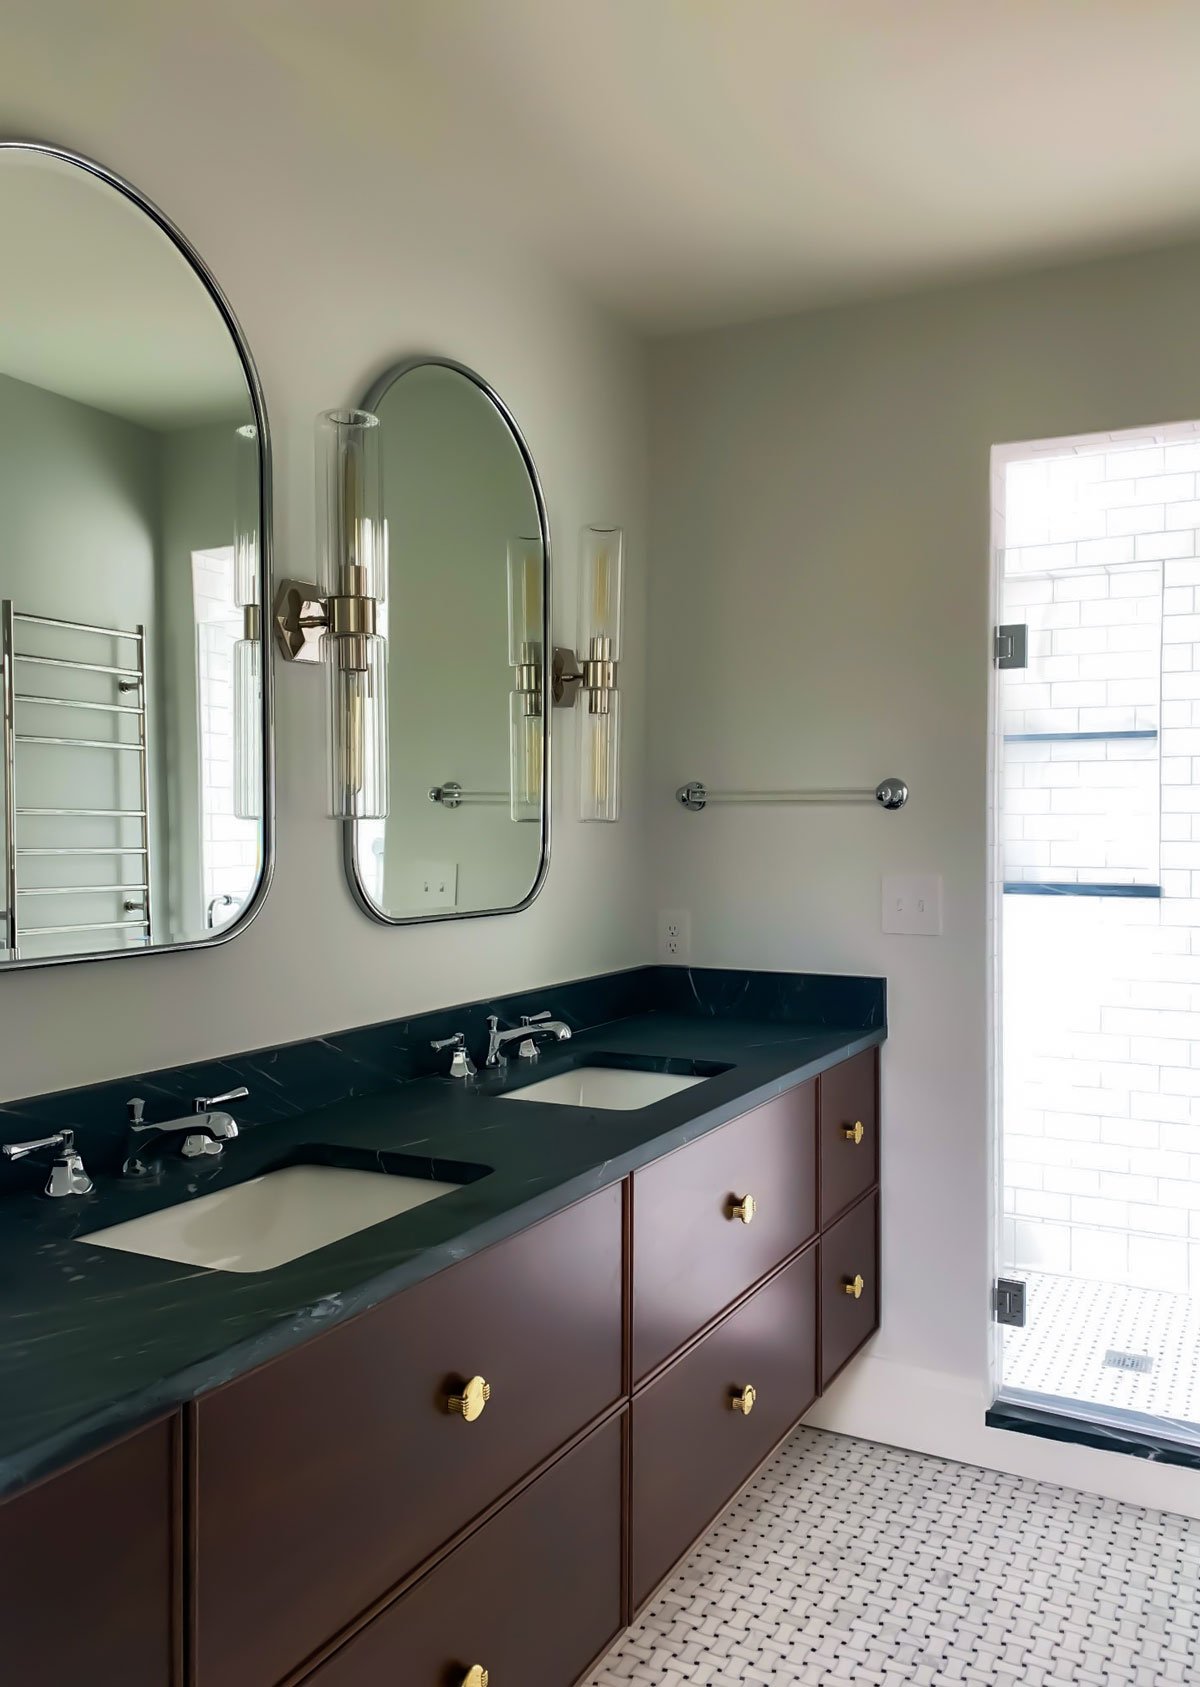 Bathroom with green countertop, double vanity mirrors, and a walk-in shower with sliding glass door